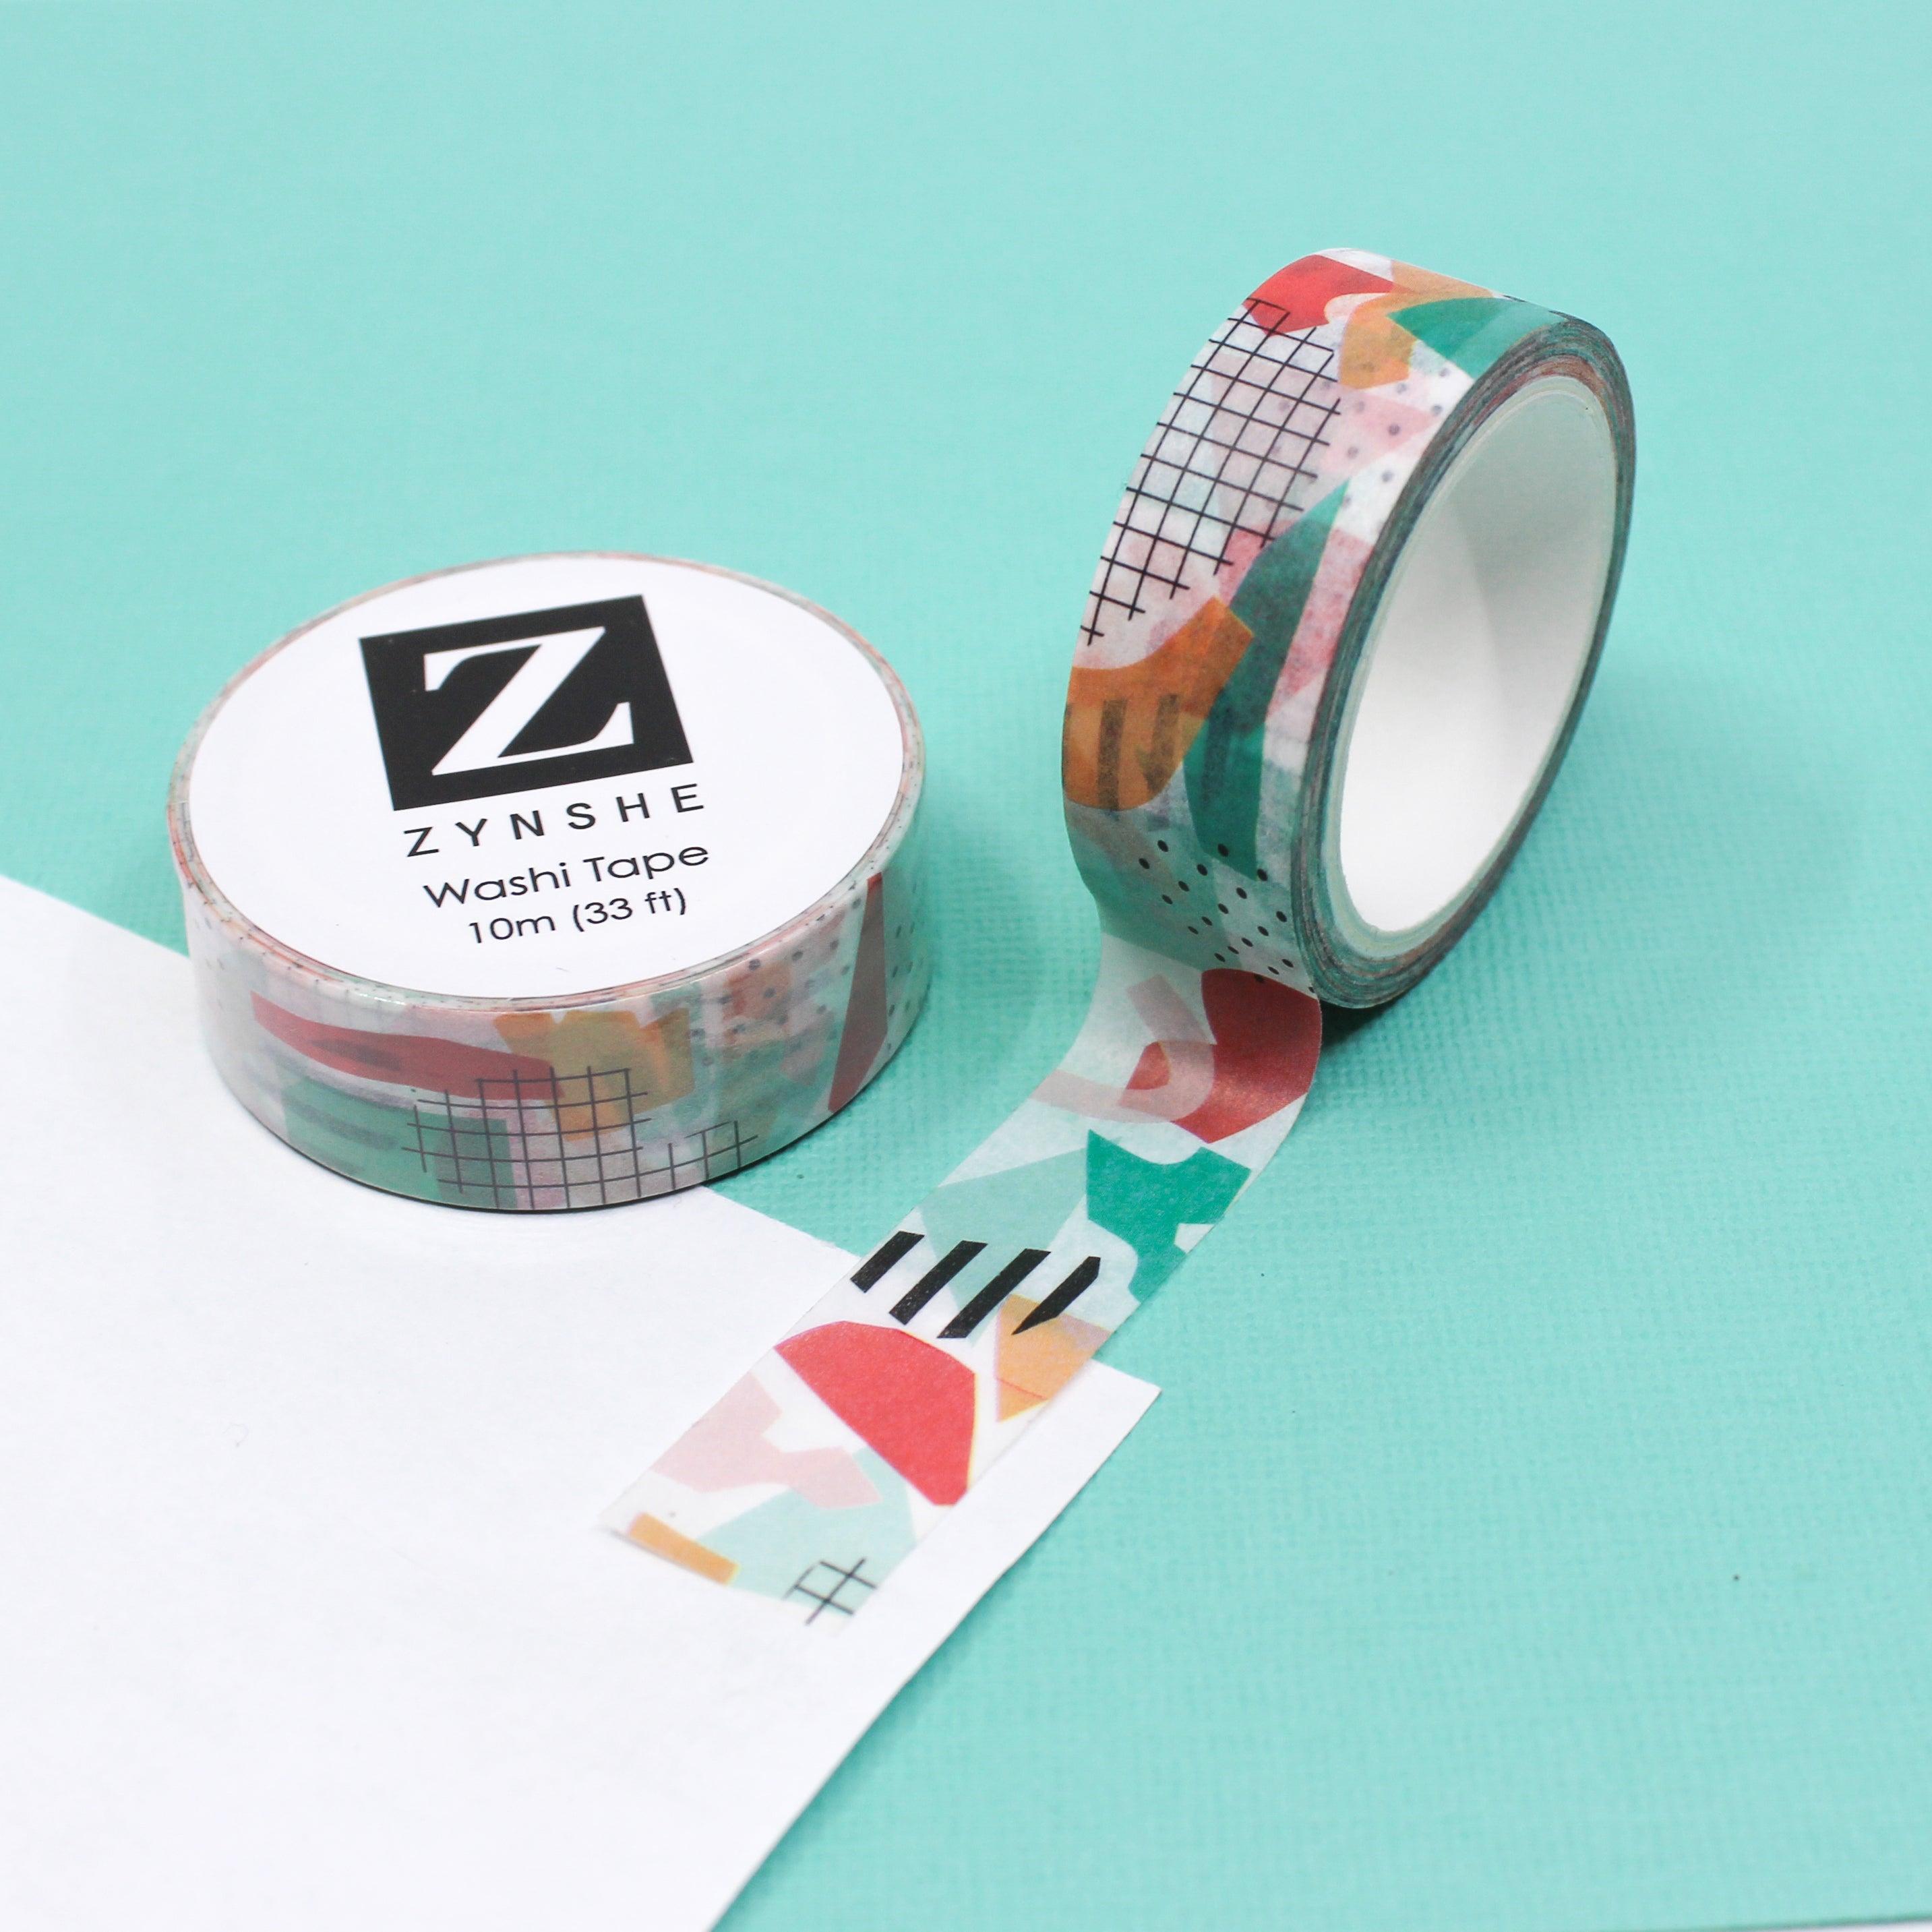 This is a washi tape with a fun pop art pattern from BBB Supplies Craft Shop.